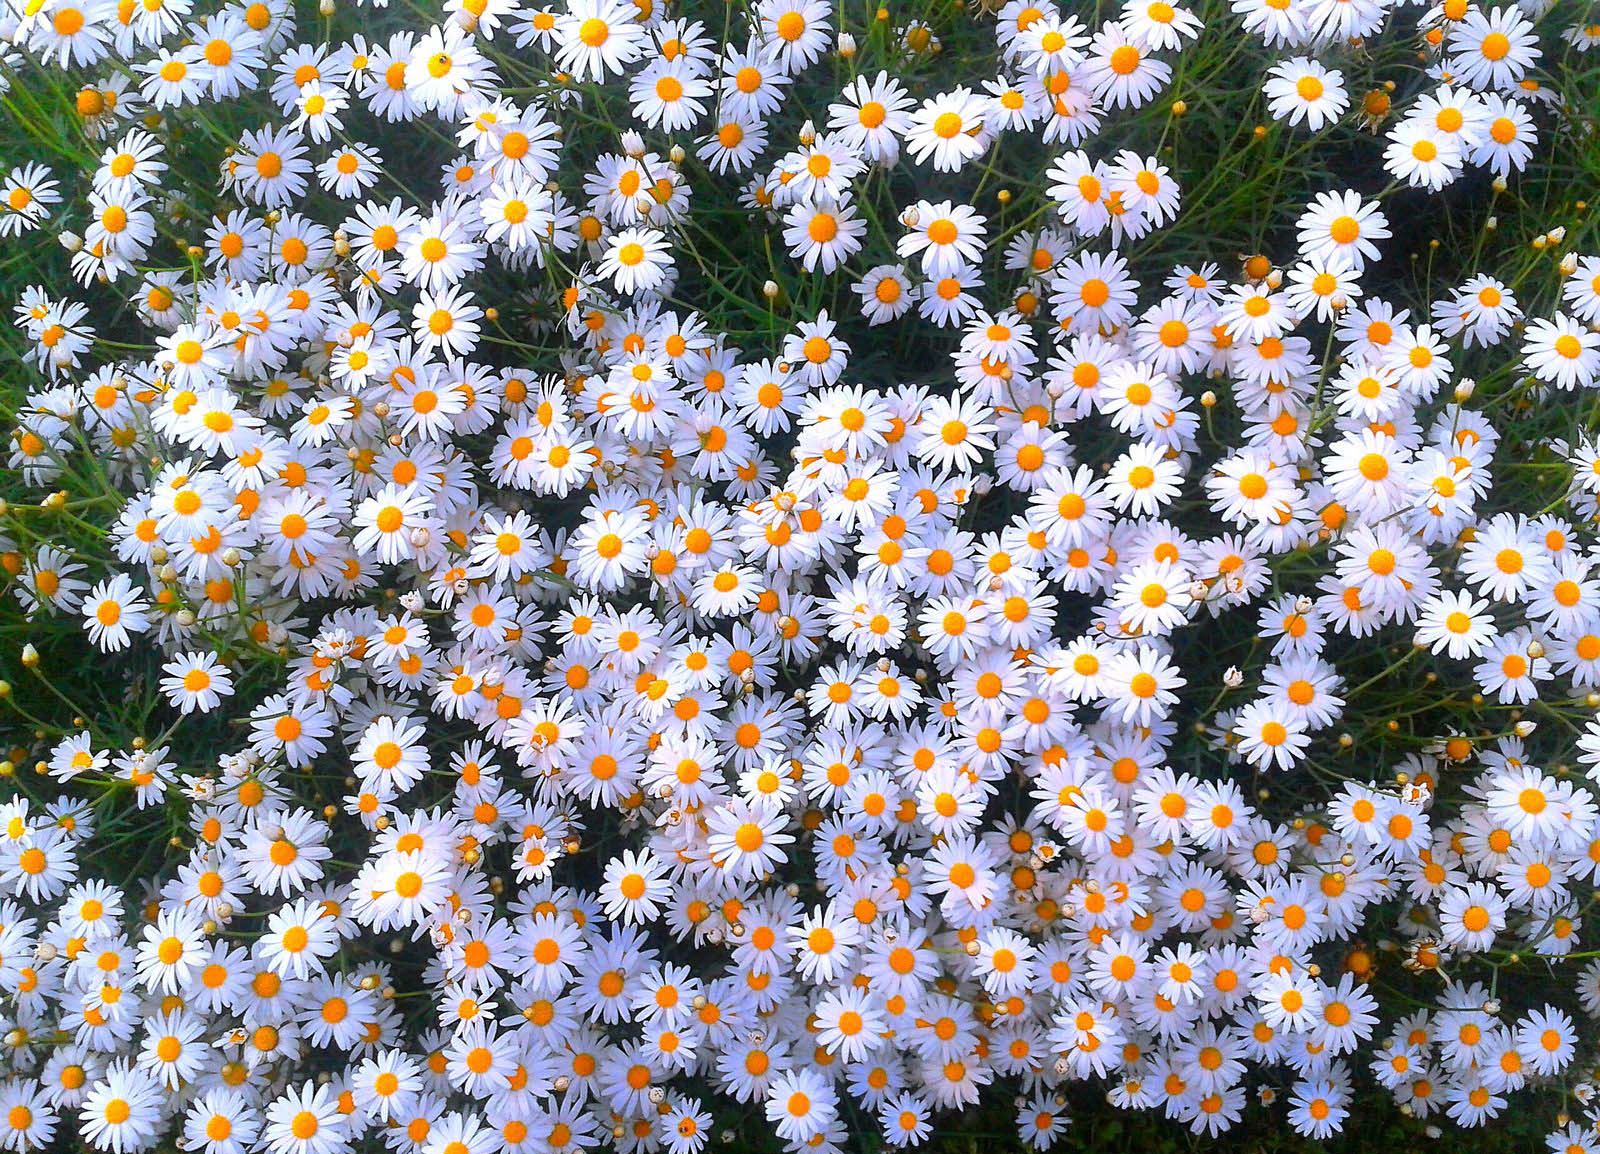 Crysanthemum Japonese Daisy Bunch Flower Images Free